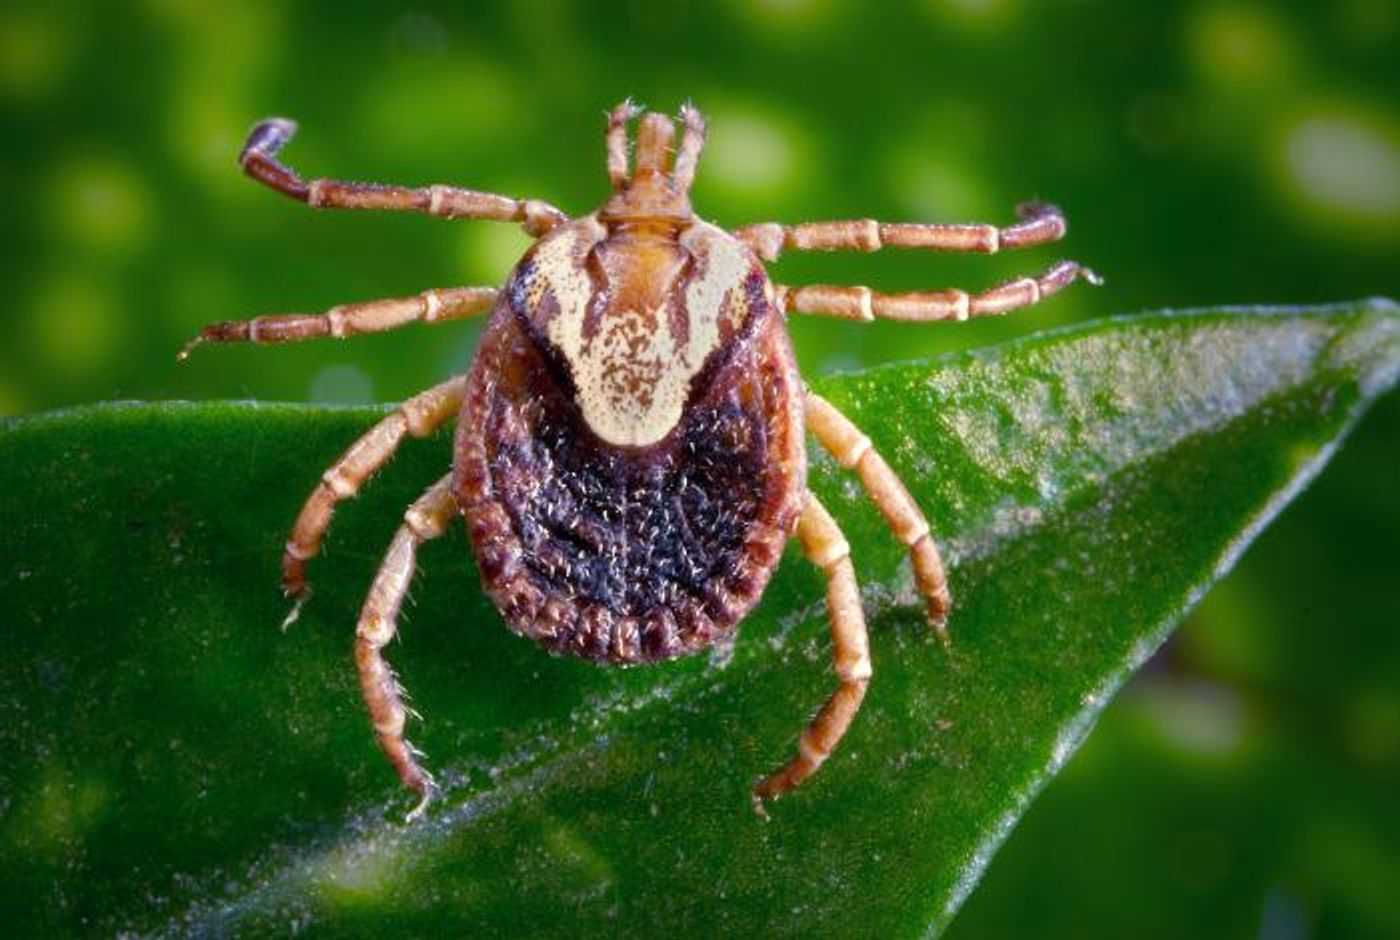 A female cayenne tick, Amblyomma cajennense. This tick species is a known North, Central and South American vector of Rickettsia rickettsii, which is the etiologic agent of Rocky Mountain spotted fever (RMSF). / Credit: CDC/ Dr. Christopher Paddock